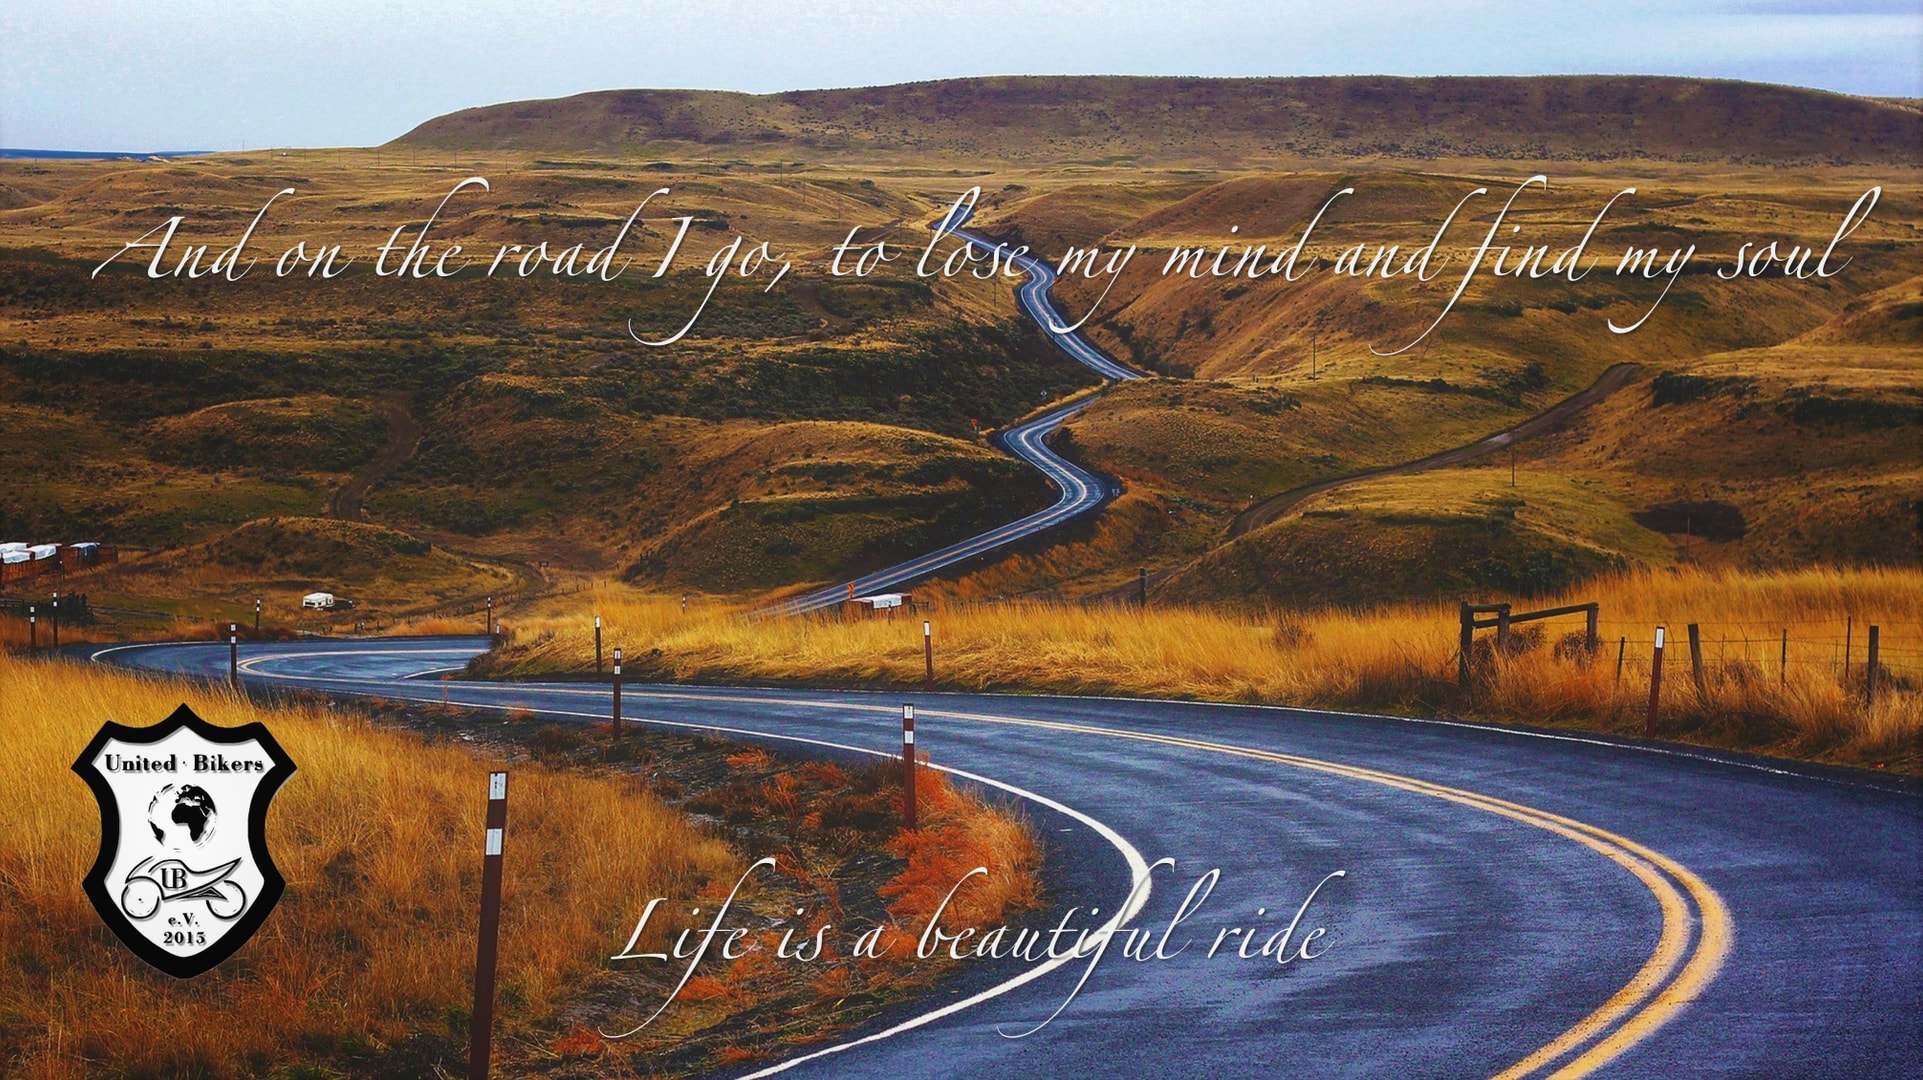 Life is a beautiful ride | United-Bikers